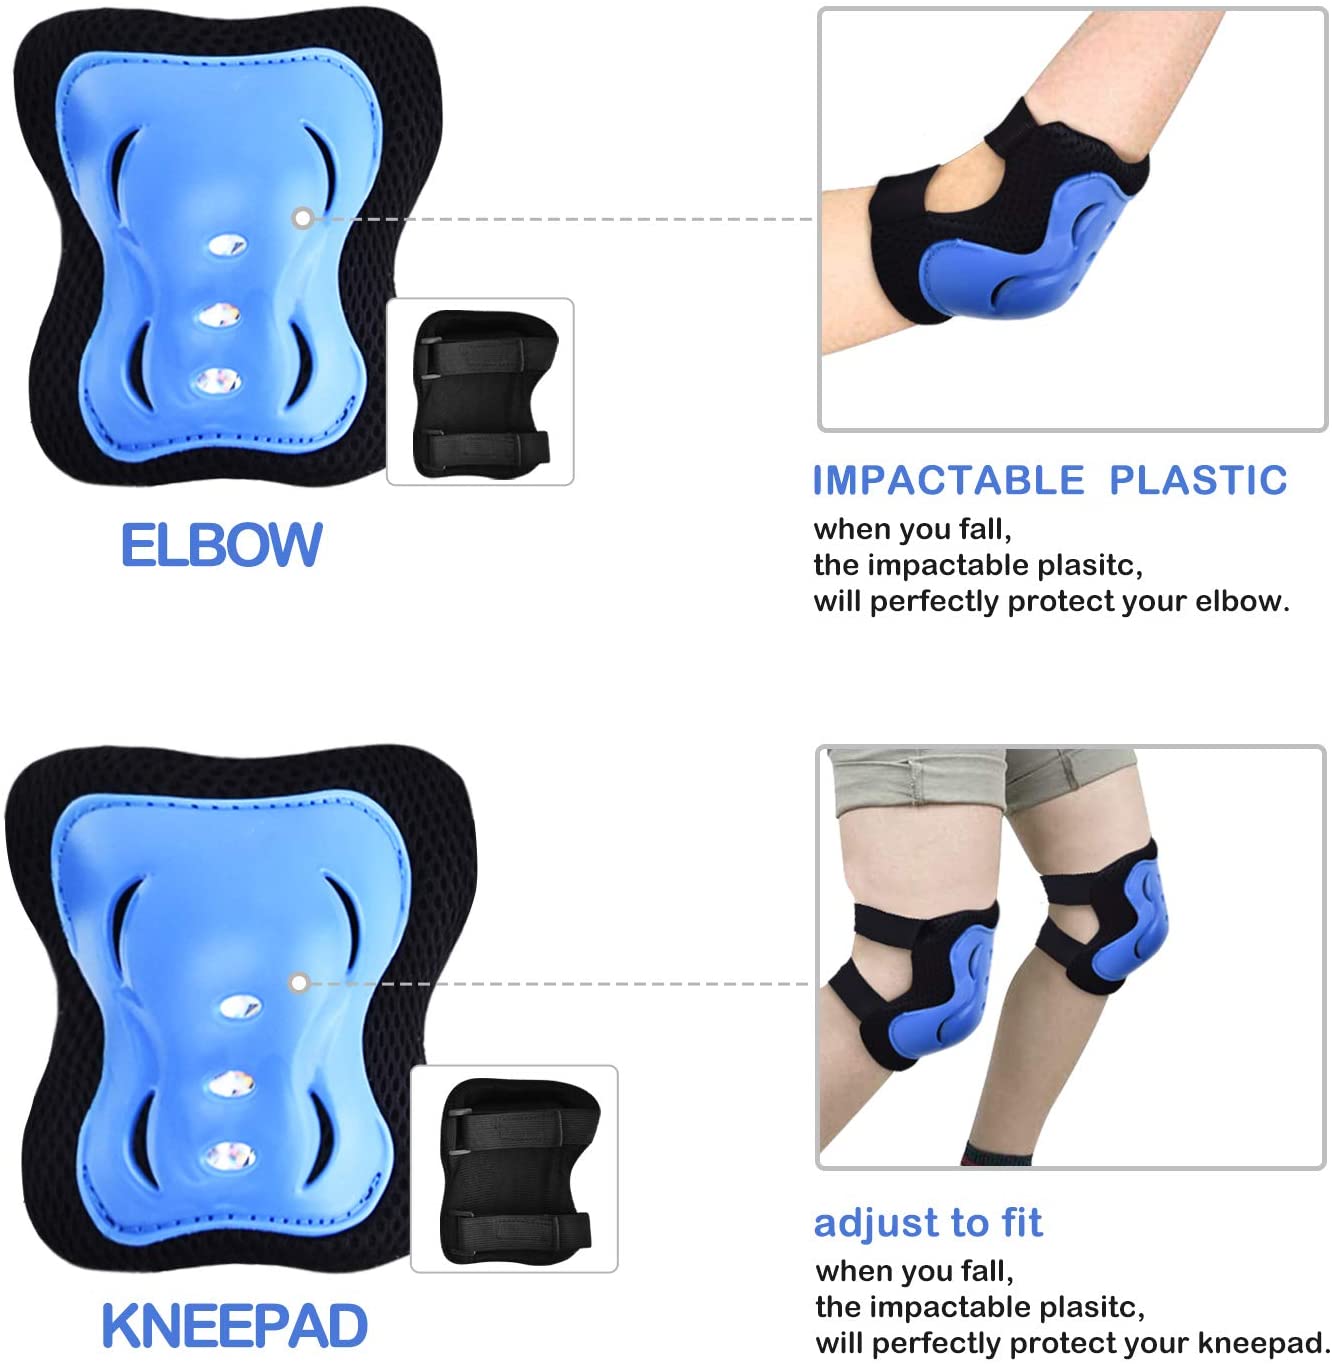 7Pcs-Elbow-Knee-Wrist-Protective-Guard-Elbow-Pads-Safety-Gear-Pad-Wrist-Guard-Skateboard-Protective--1781562-8